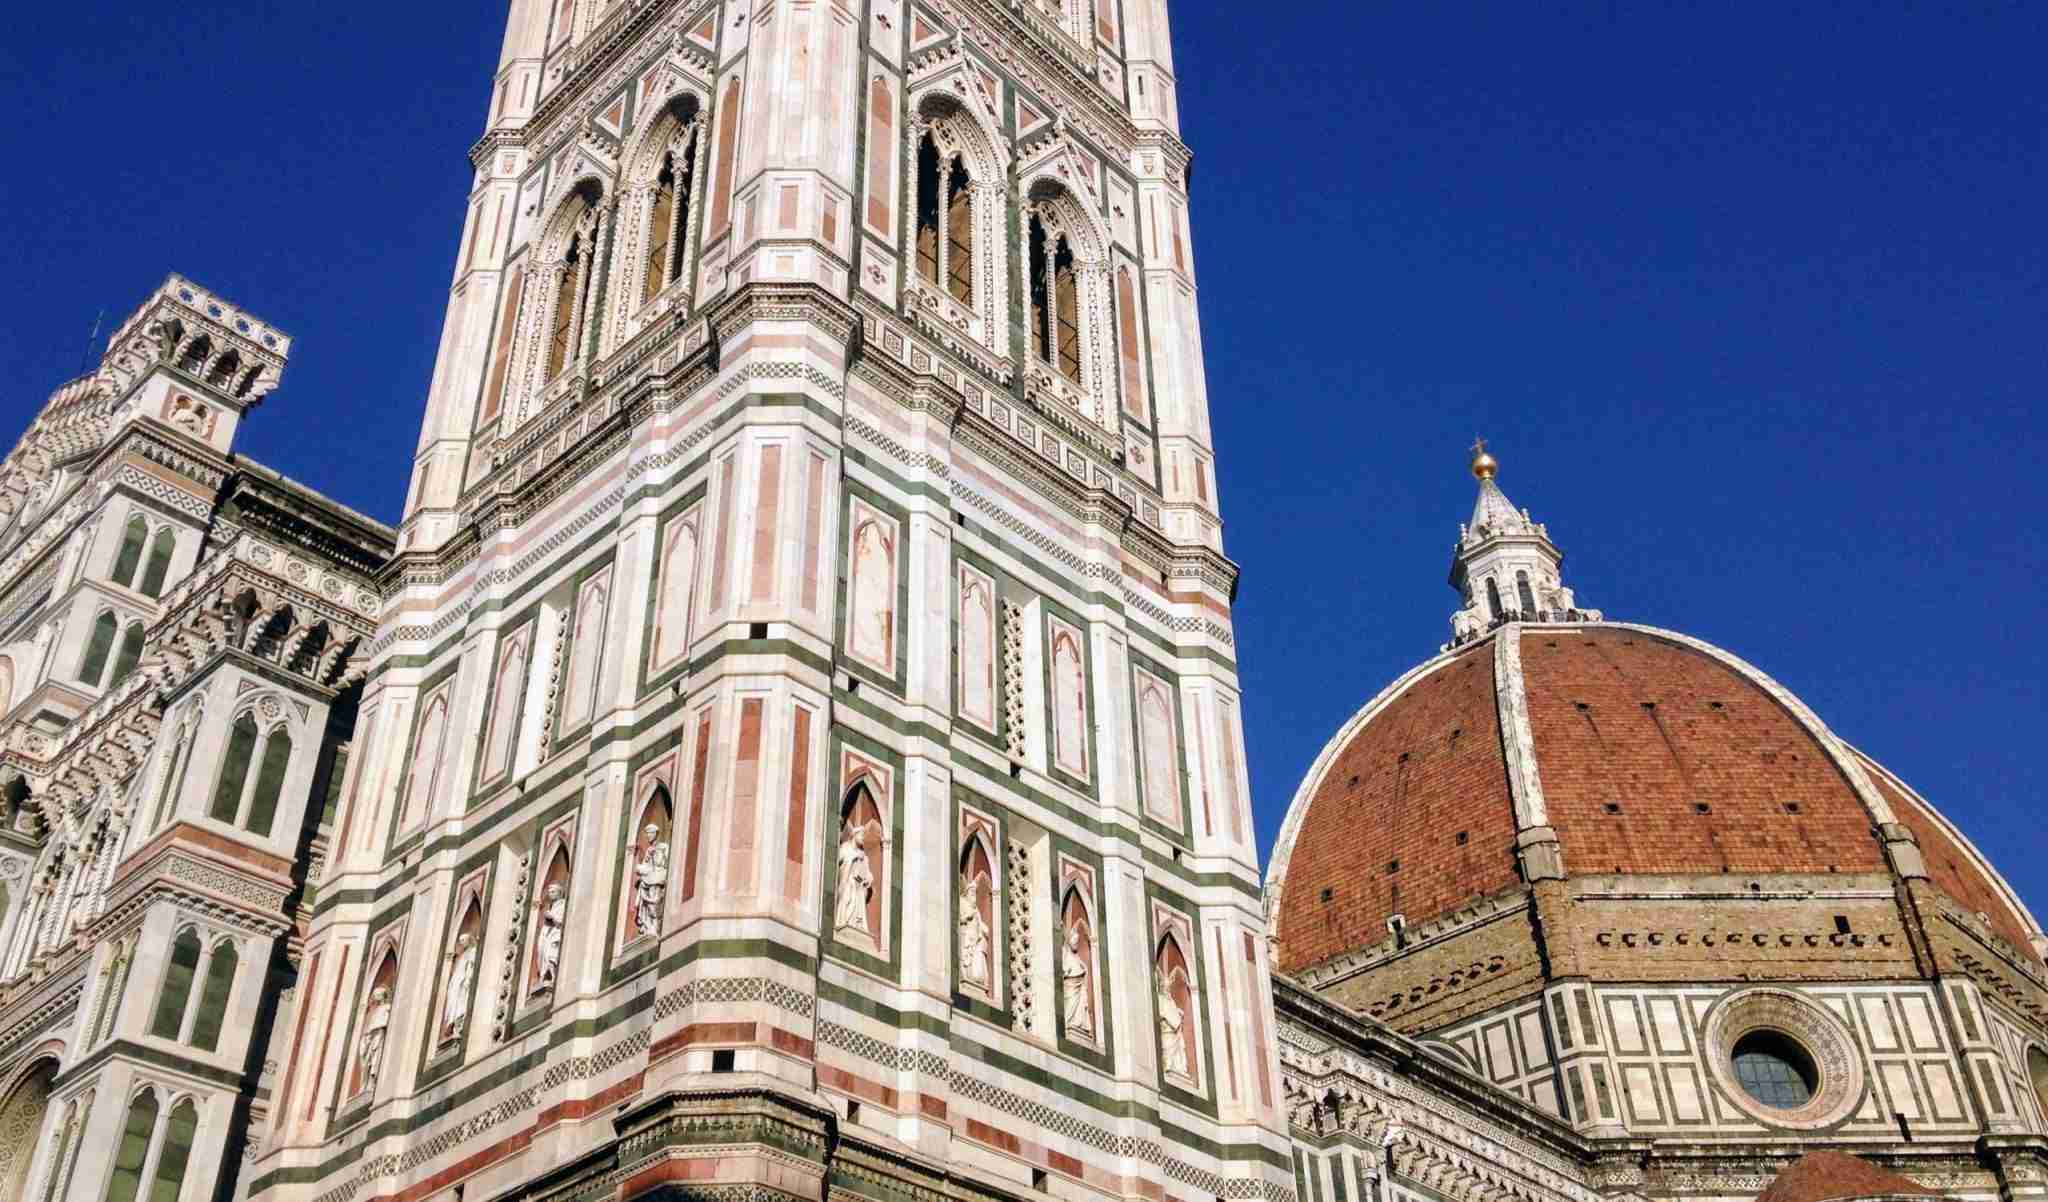 Street view of Florence Duomo and Campanile